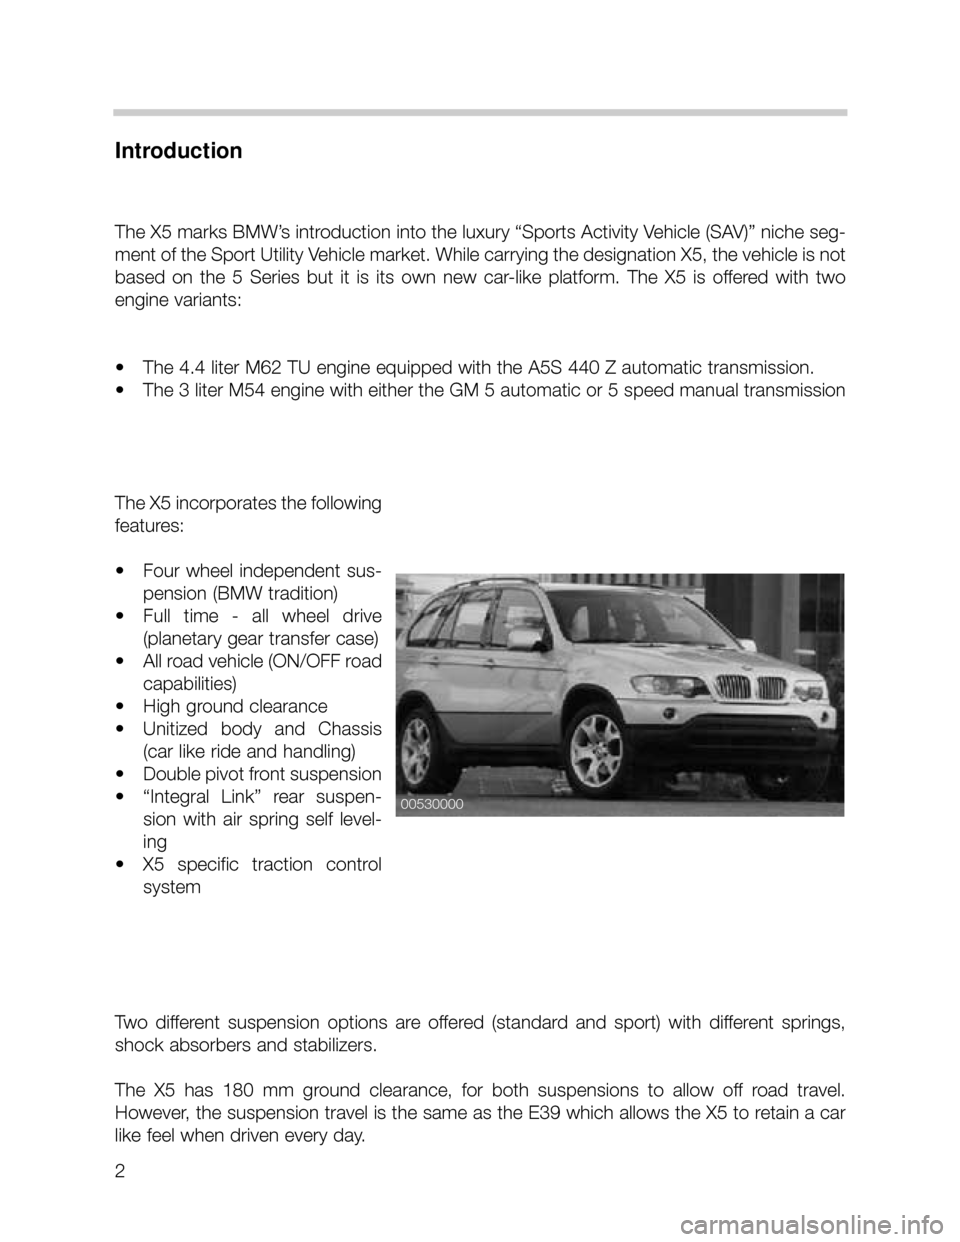 BMW X5 2000 E53 Workshop Manual 2
Introduction
The X5 marks BMW’s introduction into the luxury “Sports Activity Vehicle (SAV)” niche seg-
ment of the Sport Utility Vehicle market. While carrying the designation X5, the vehicle